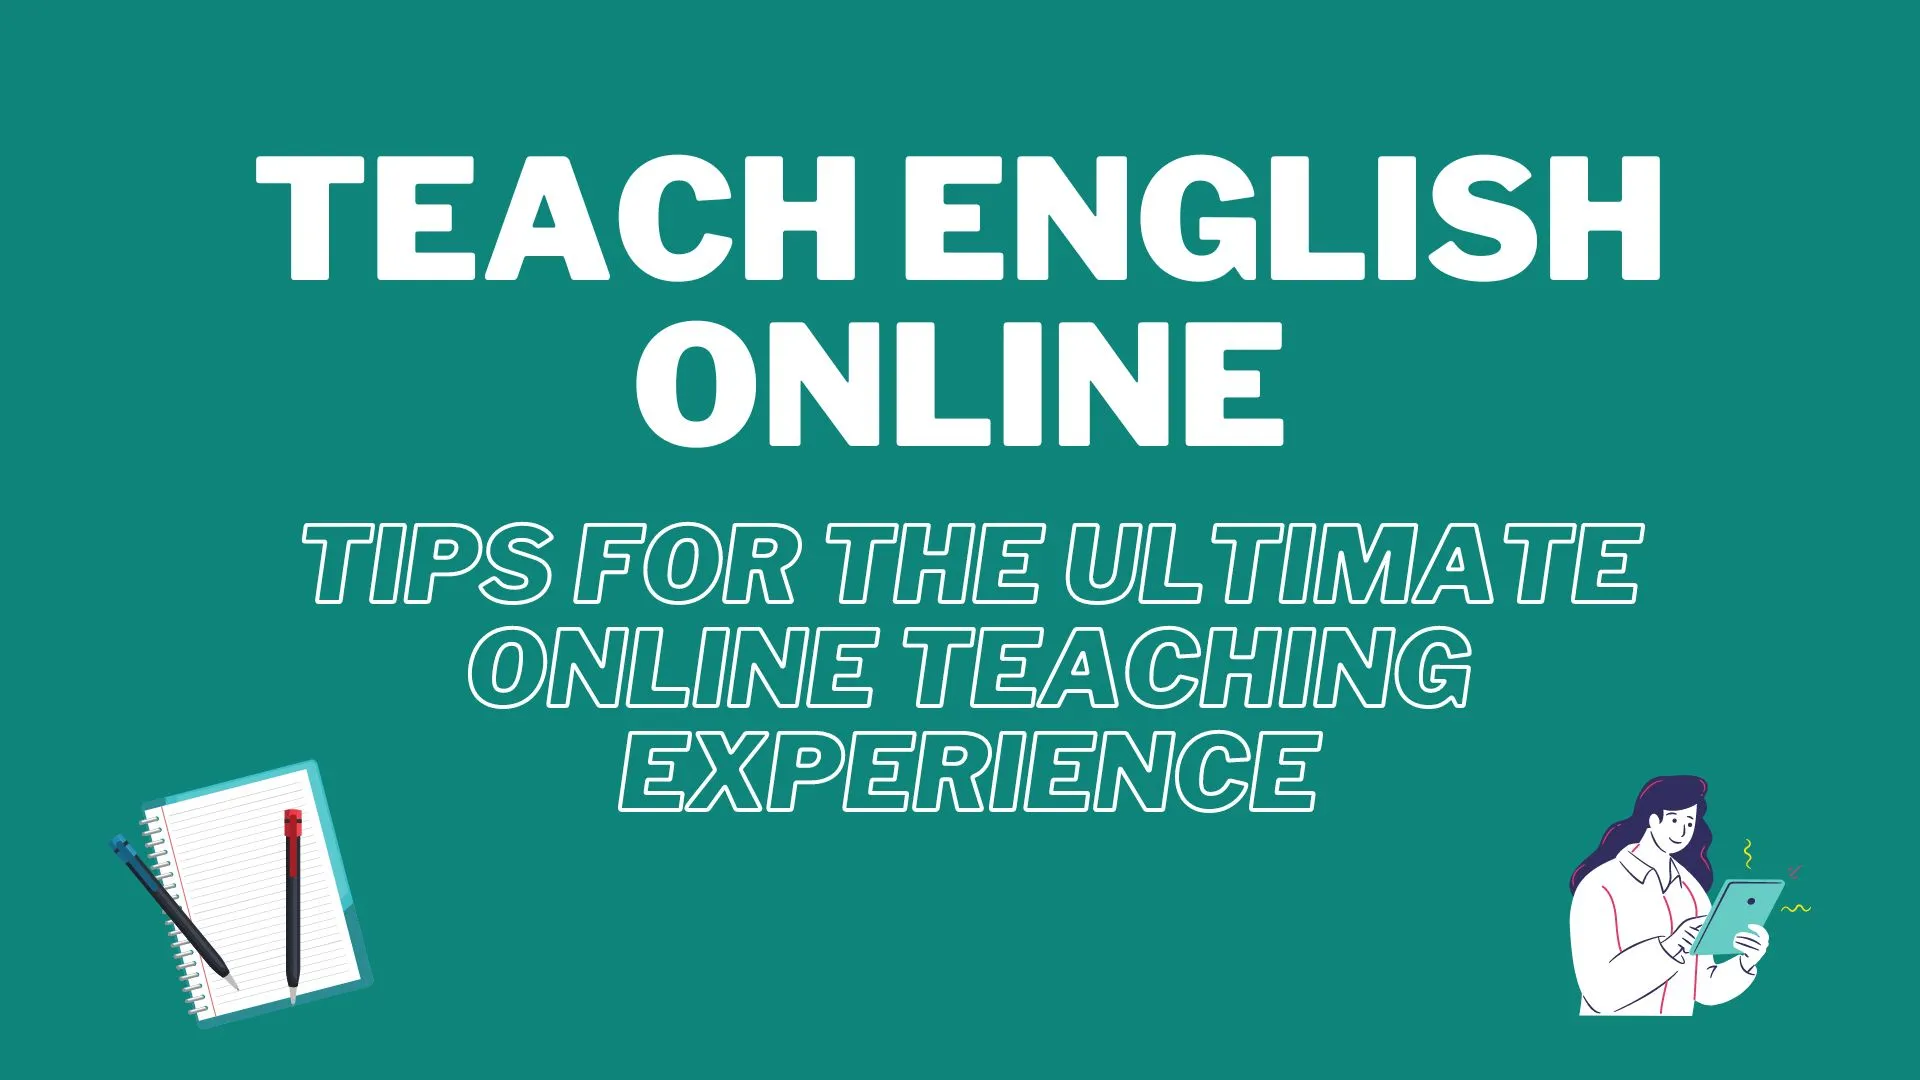 Teach English Online successfully with high-quality, engaging ESL lesson plans